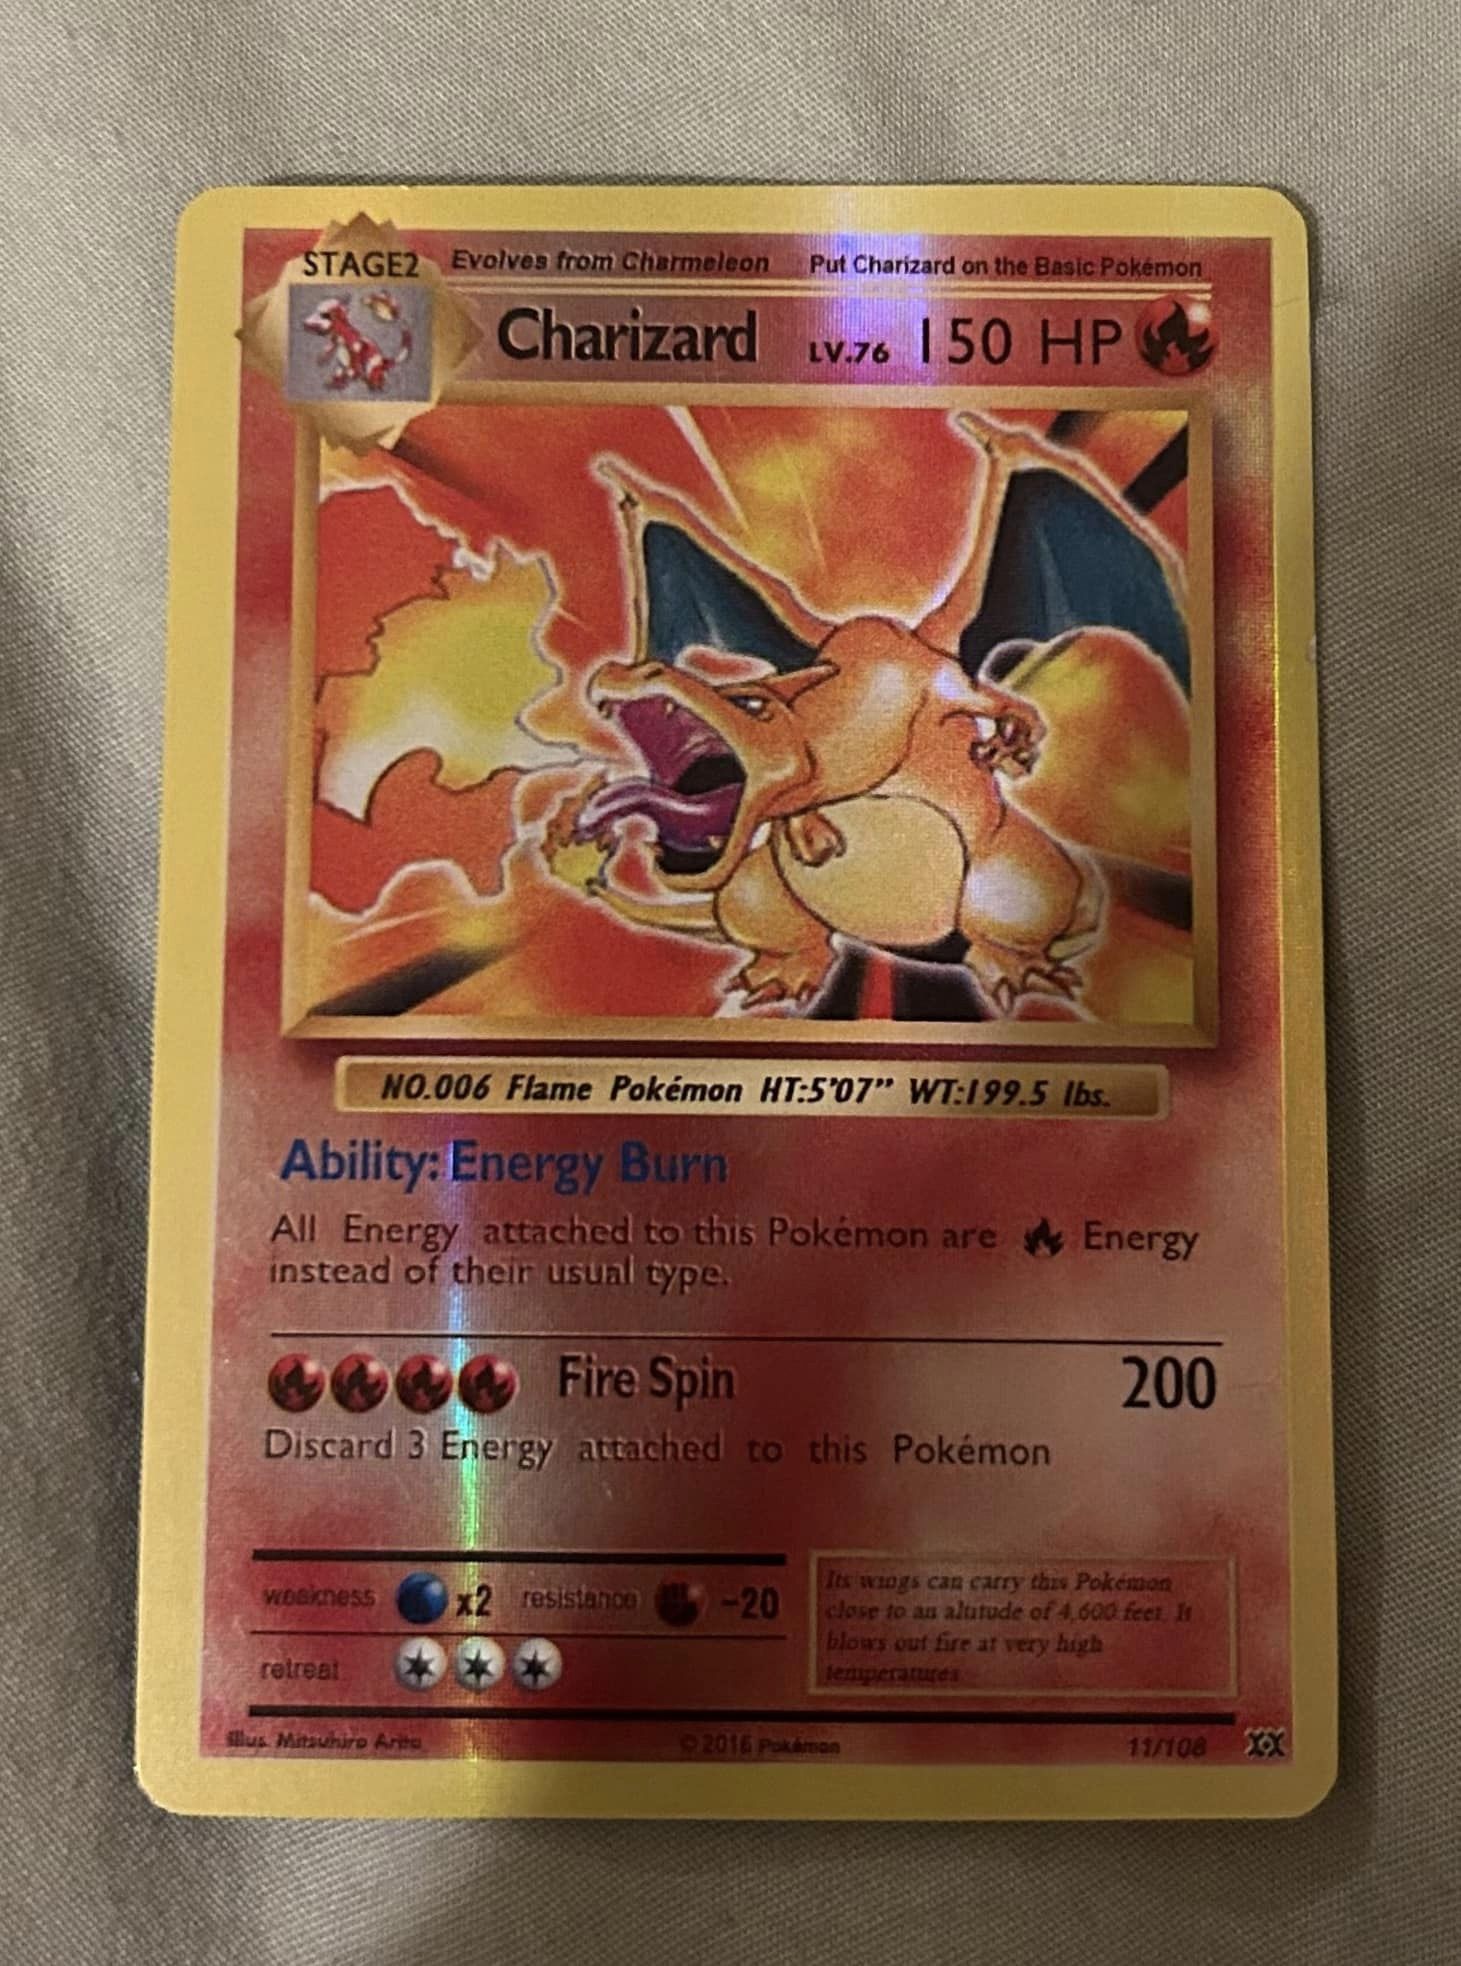 A second example of a fake Charizard card